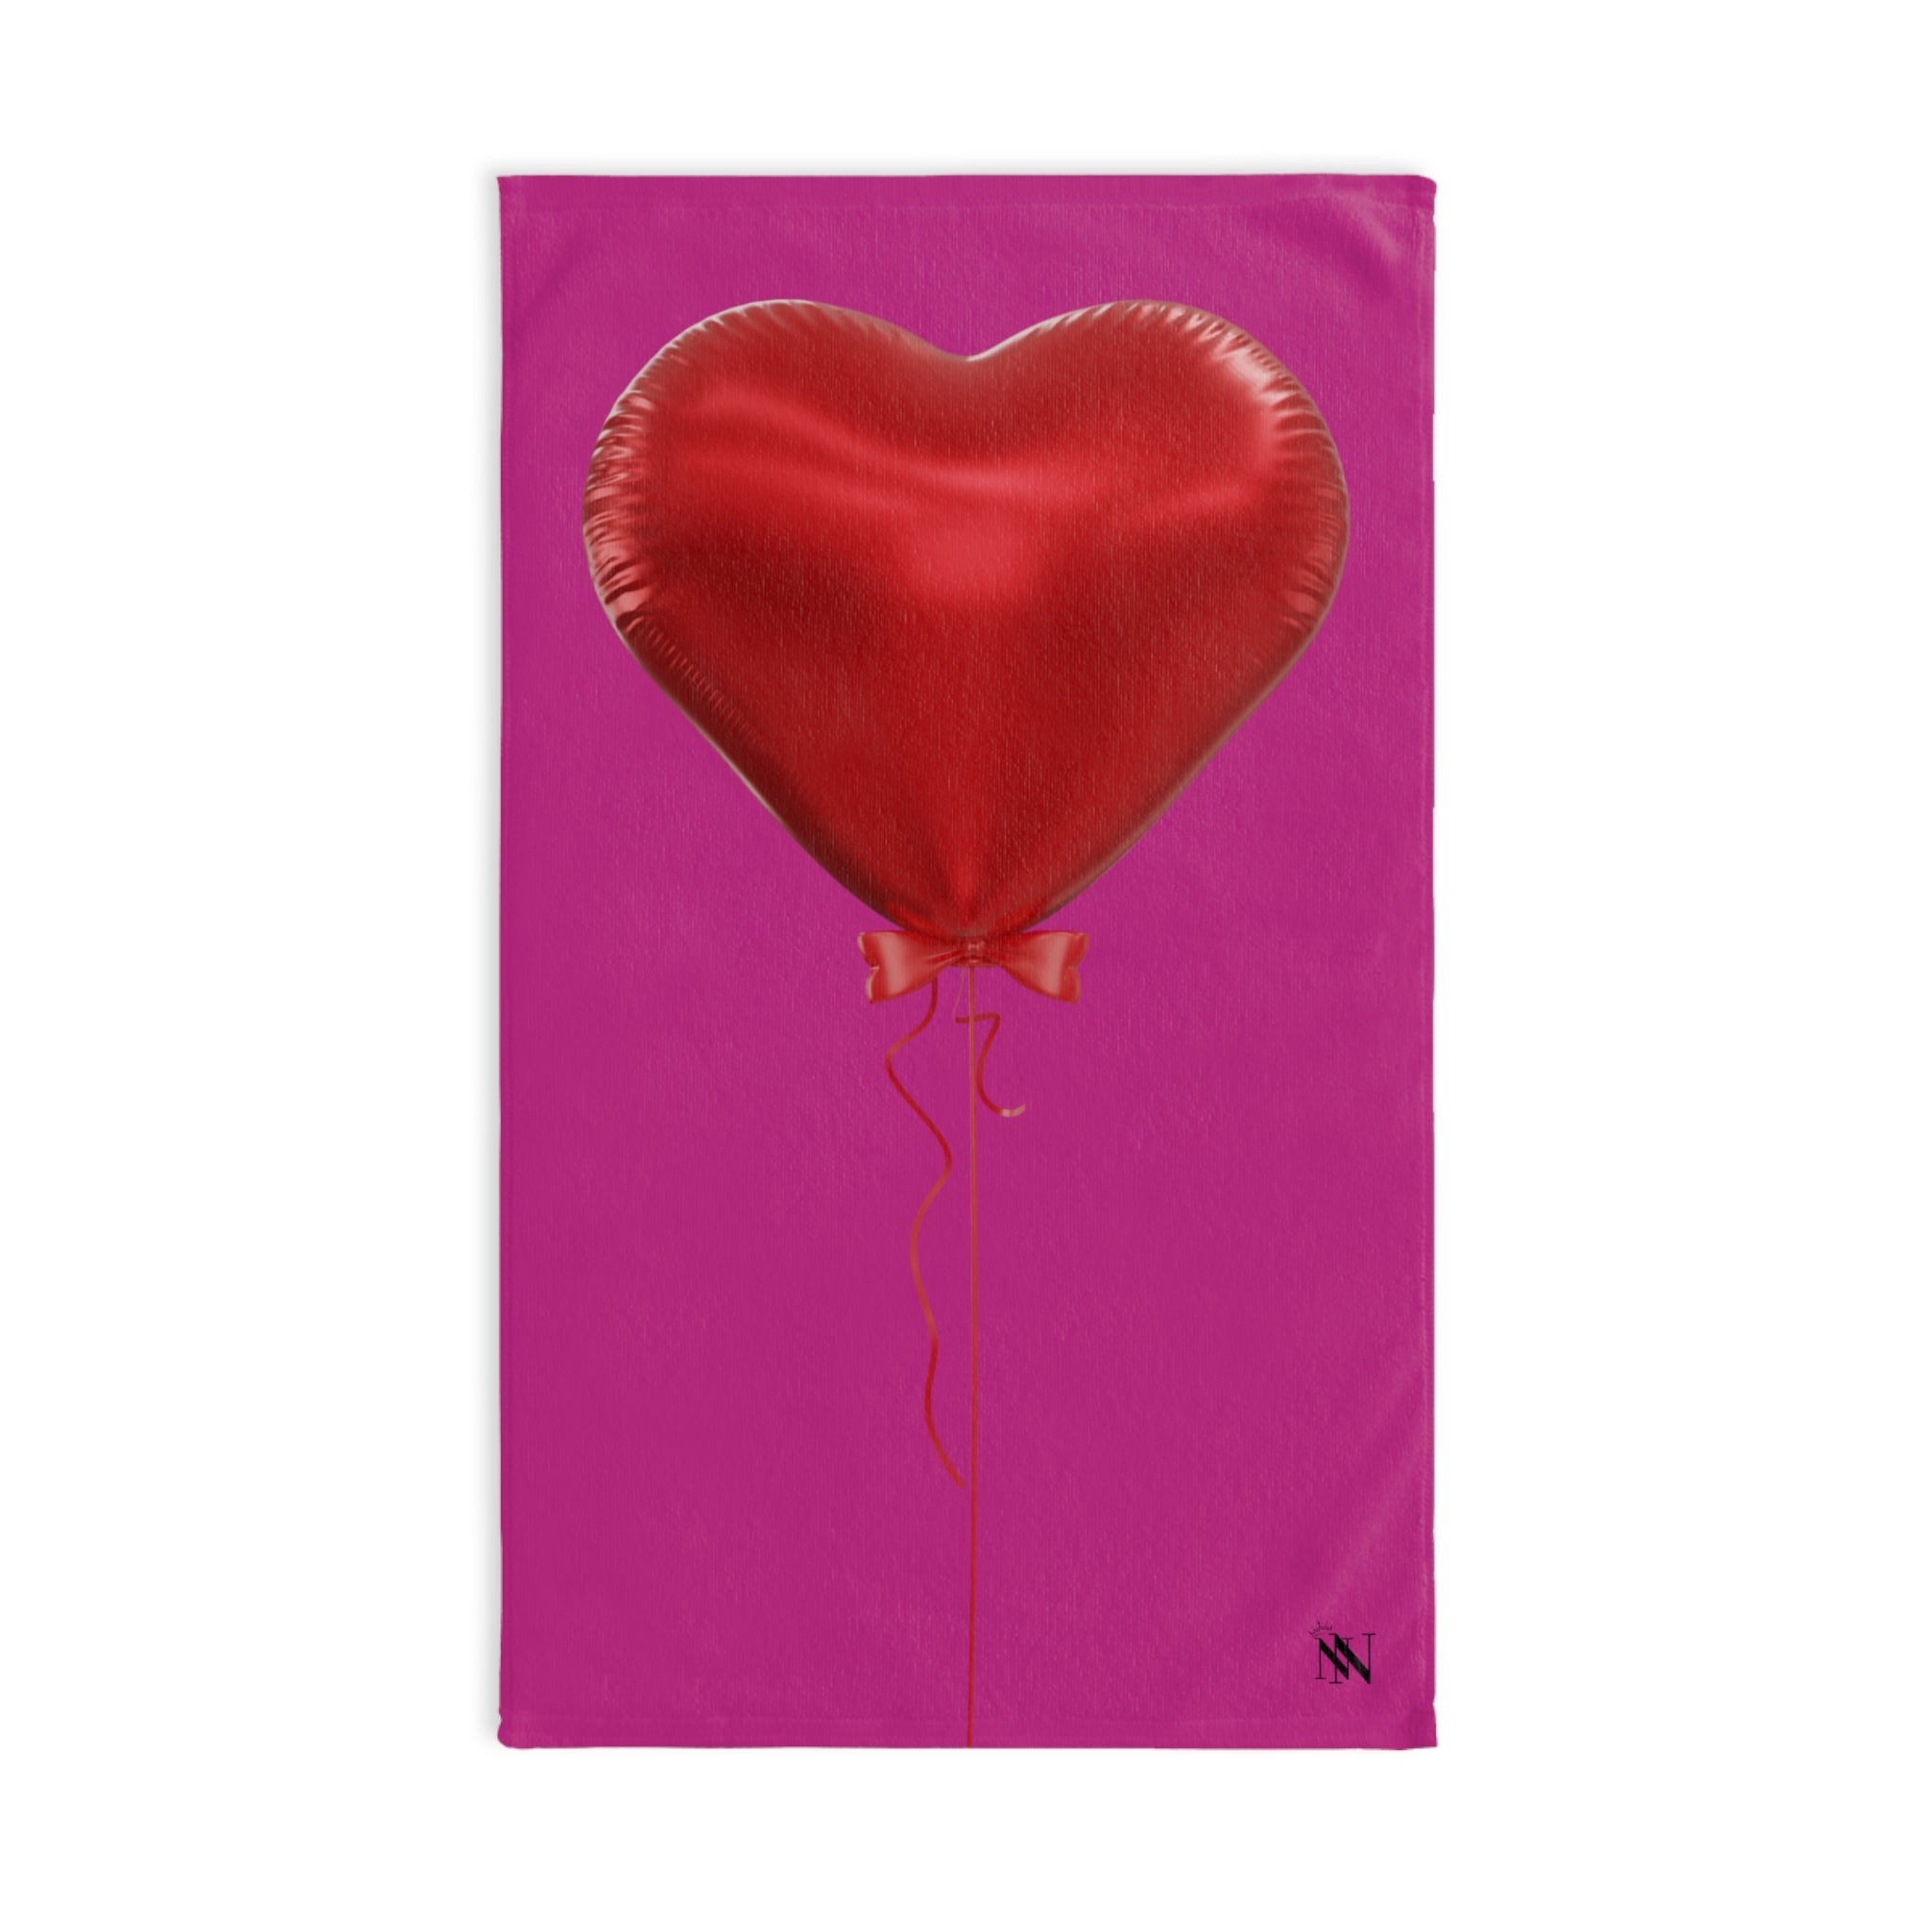 Red Balloon 3D Fuscia | Funny Gifts for Men - Gifts for Him - Birthday Gifts for Men, Him, Husband, Boyfriend, New Couple Gifts, Fathers & Valentines Day Gifts, Hand Towels NECTAR NAPKINS